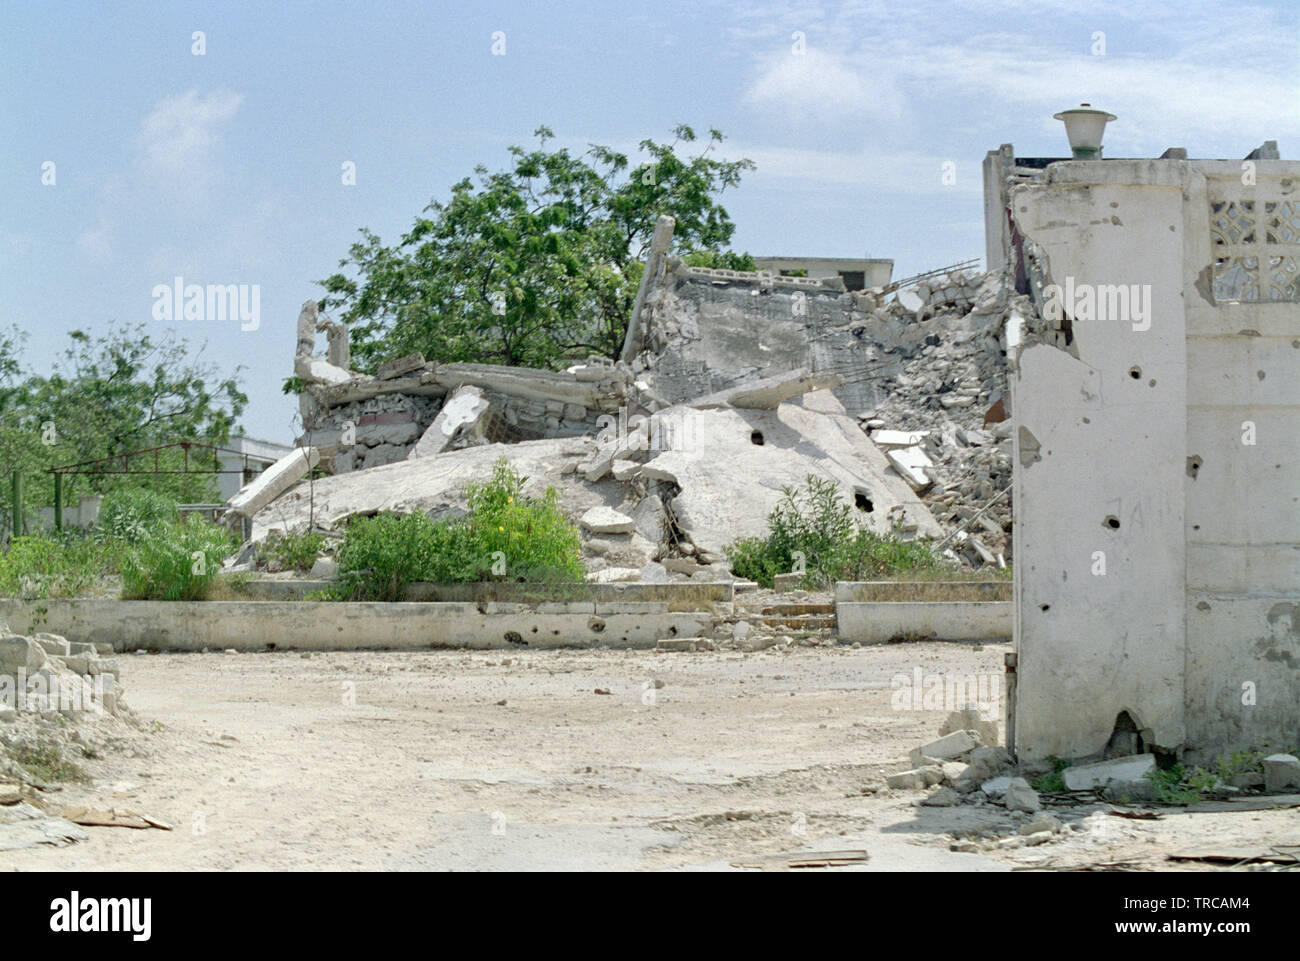 2nd November 1993 The ruins of General Mohamed Farrah Aidid's headquarters in southern Mogadishu, Somalia, destroyed by American forces on June 17th 1993. Stock Photo